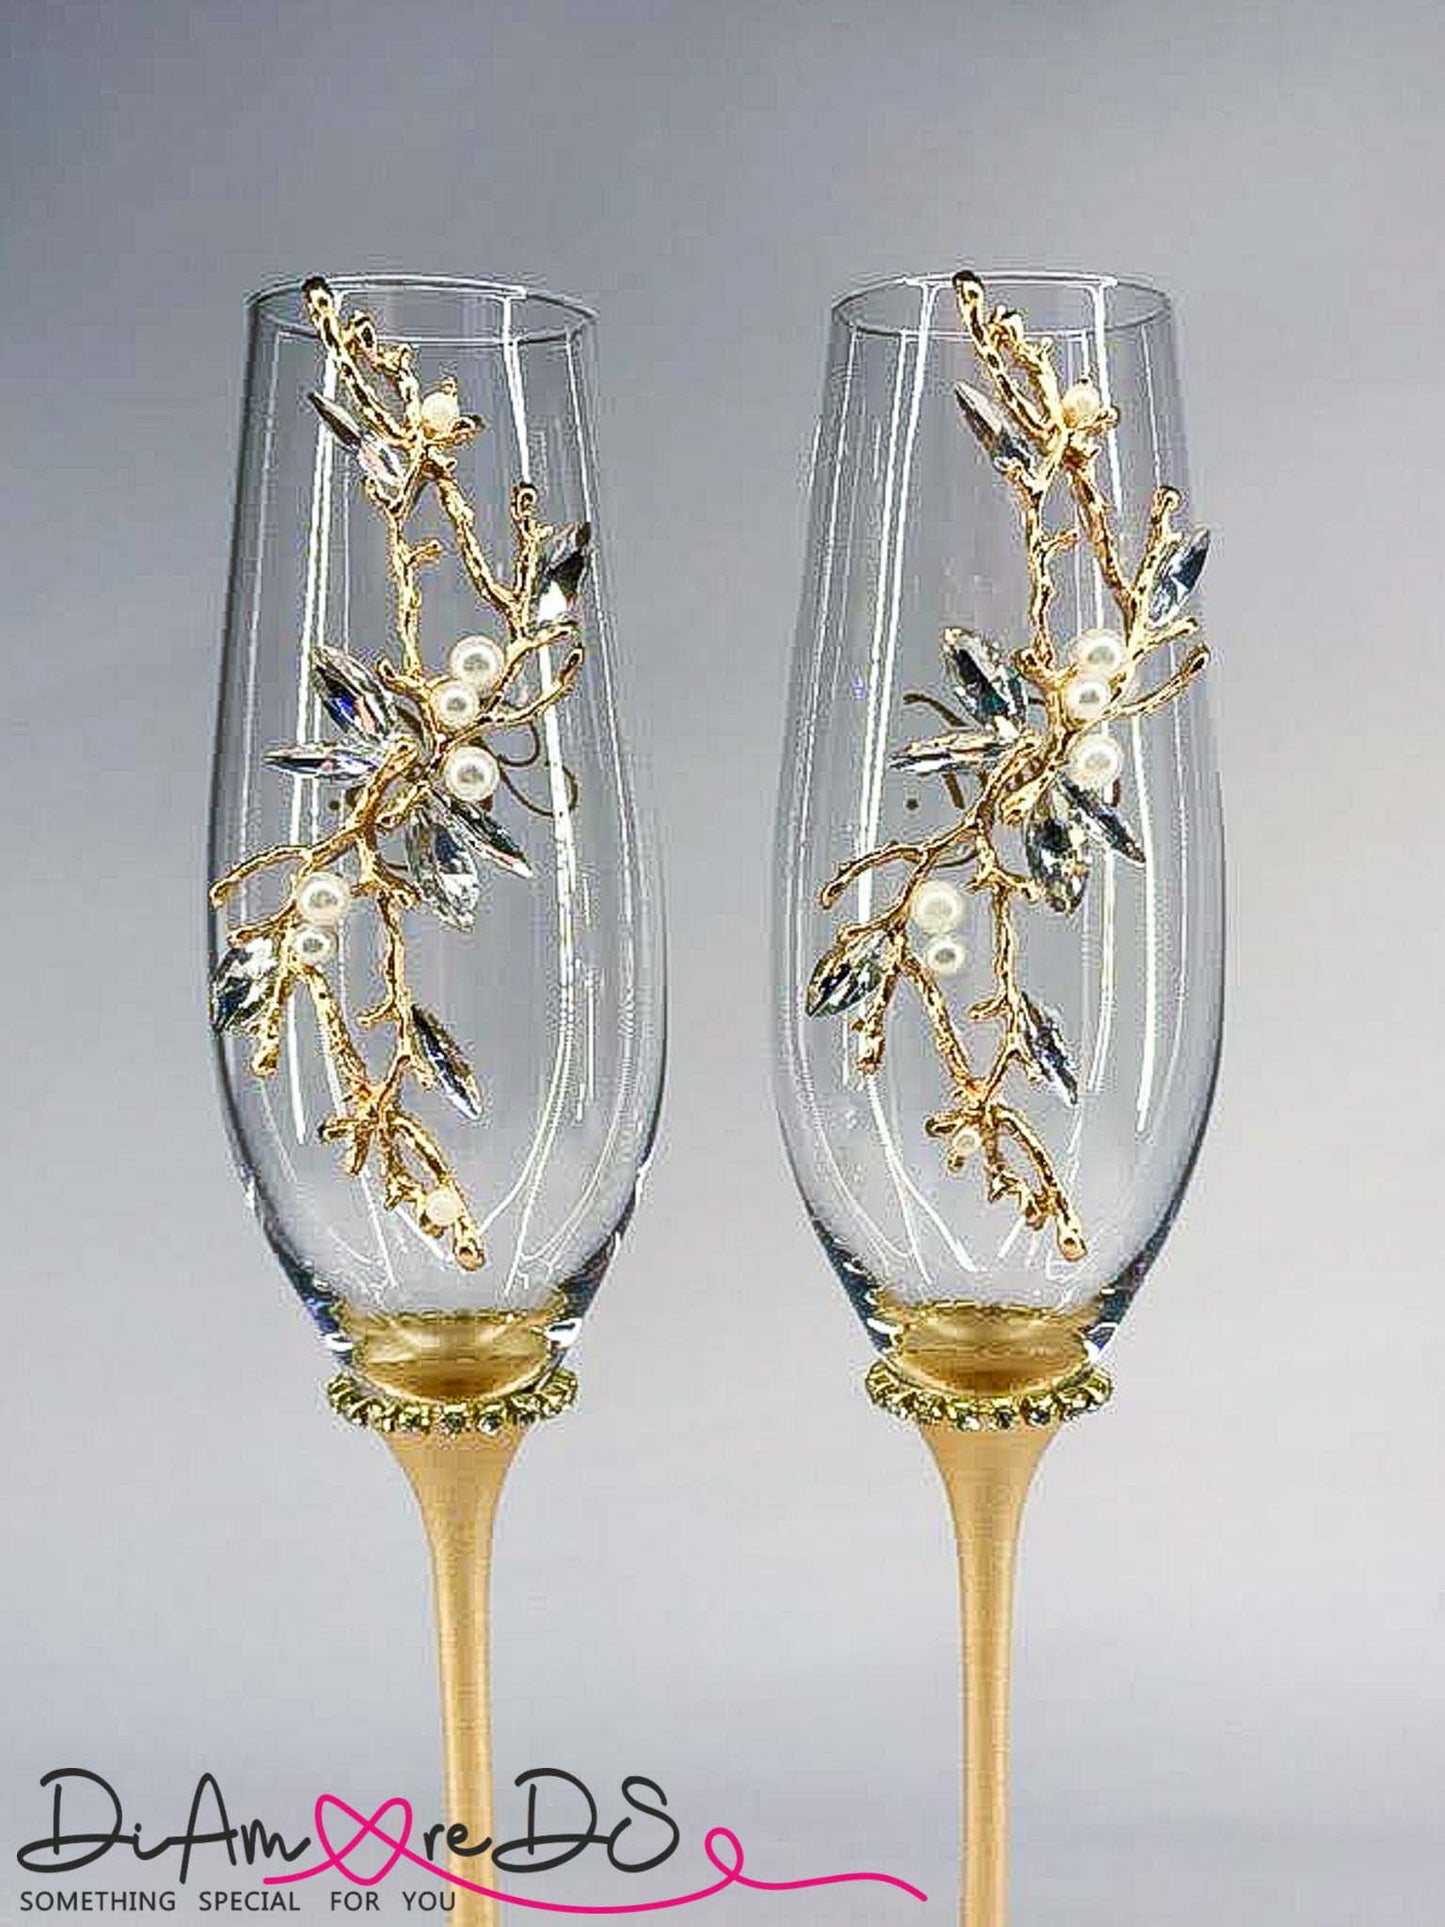 Elegant wedding glasses and cake set with gold accents